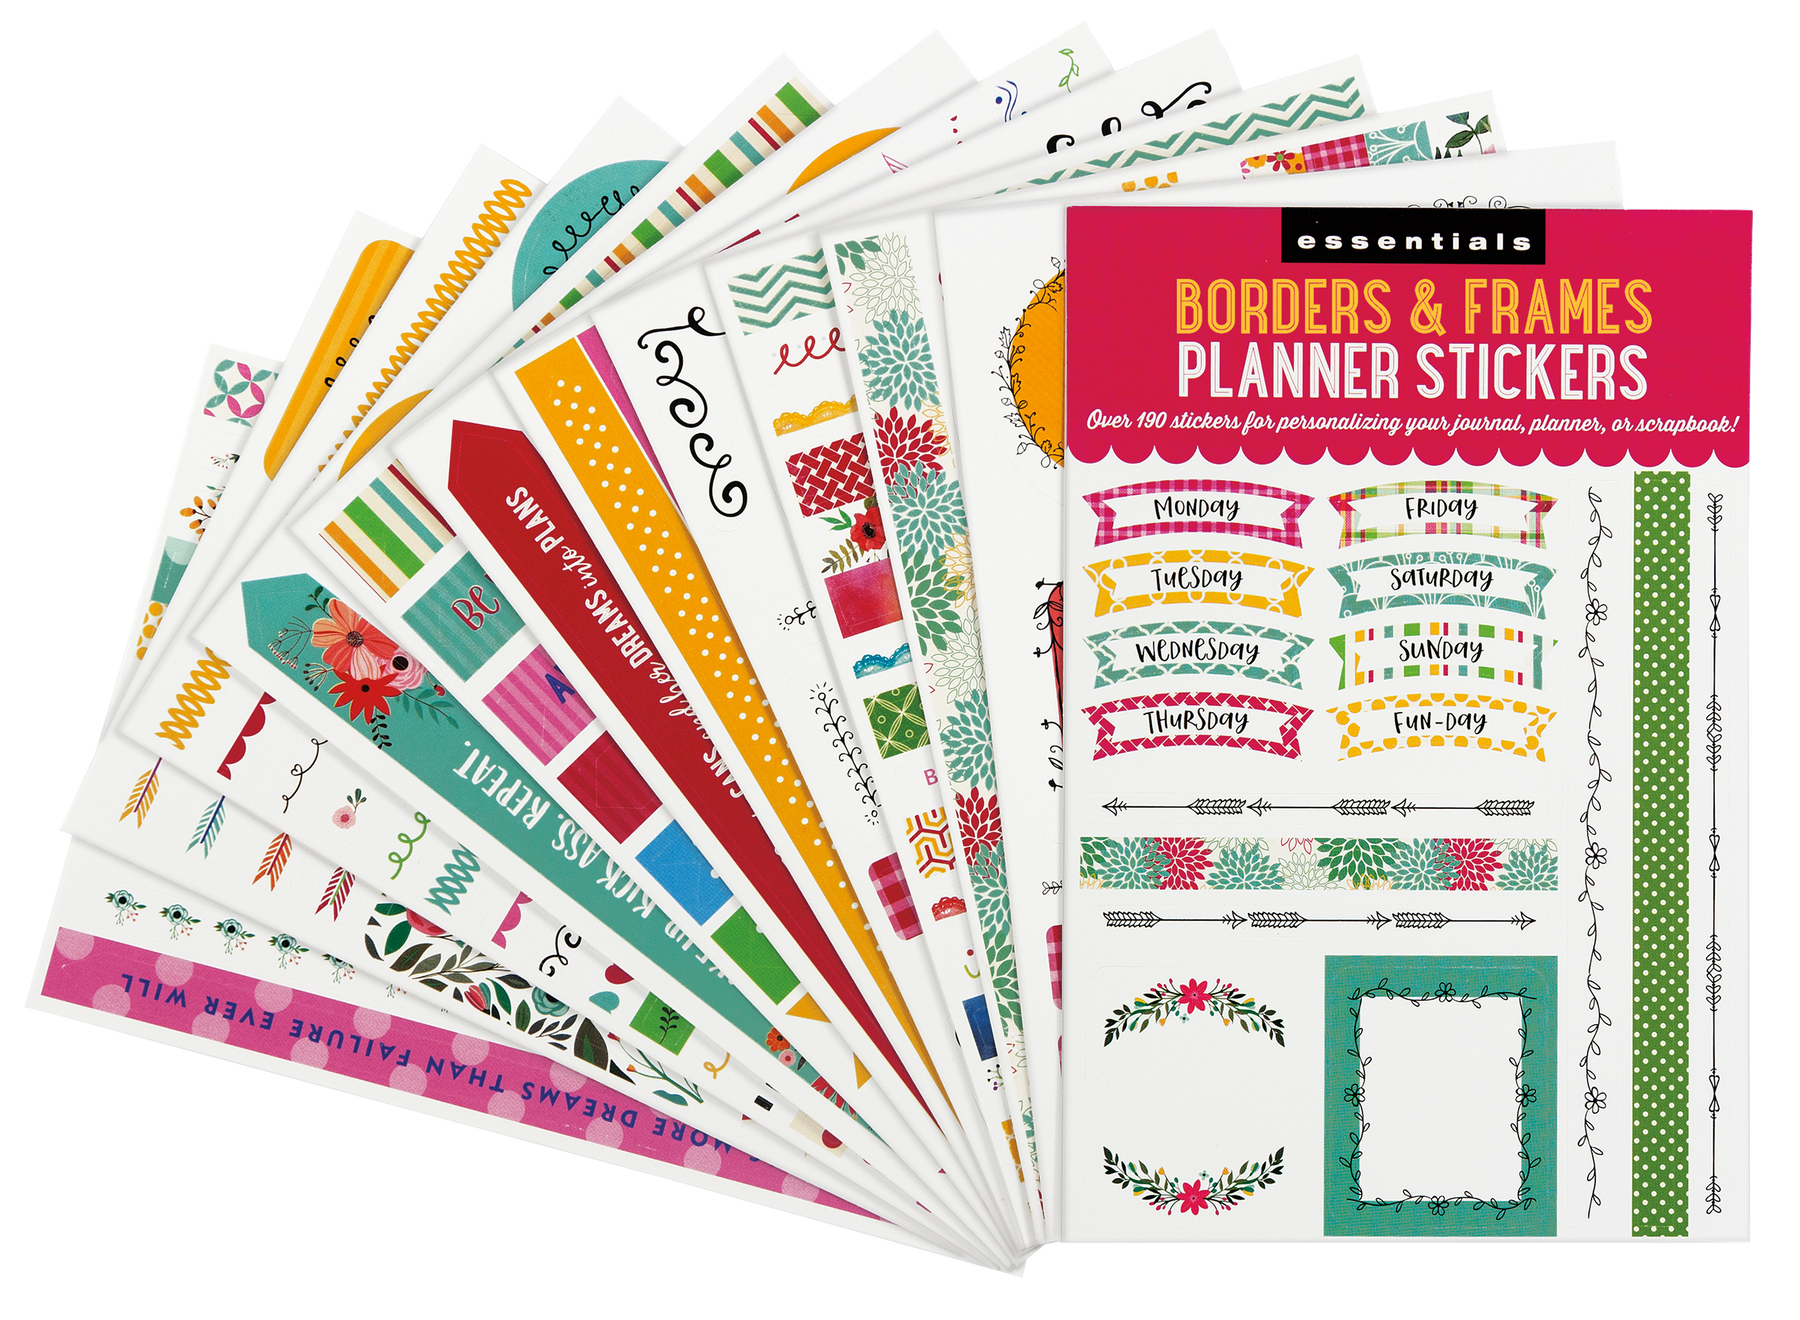 Positive Quotes Planner Stickers Diary Stickers Stickers Journal Stickers  Scrapbook Stickers Positive Vibes 